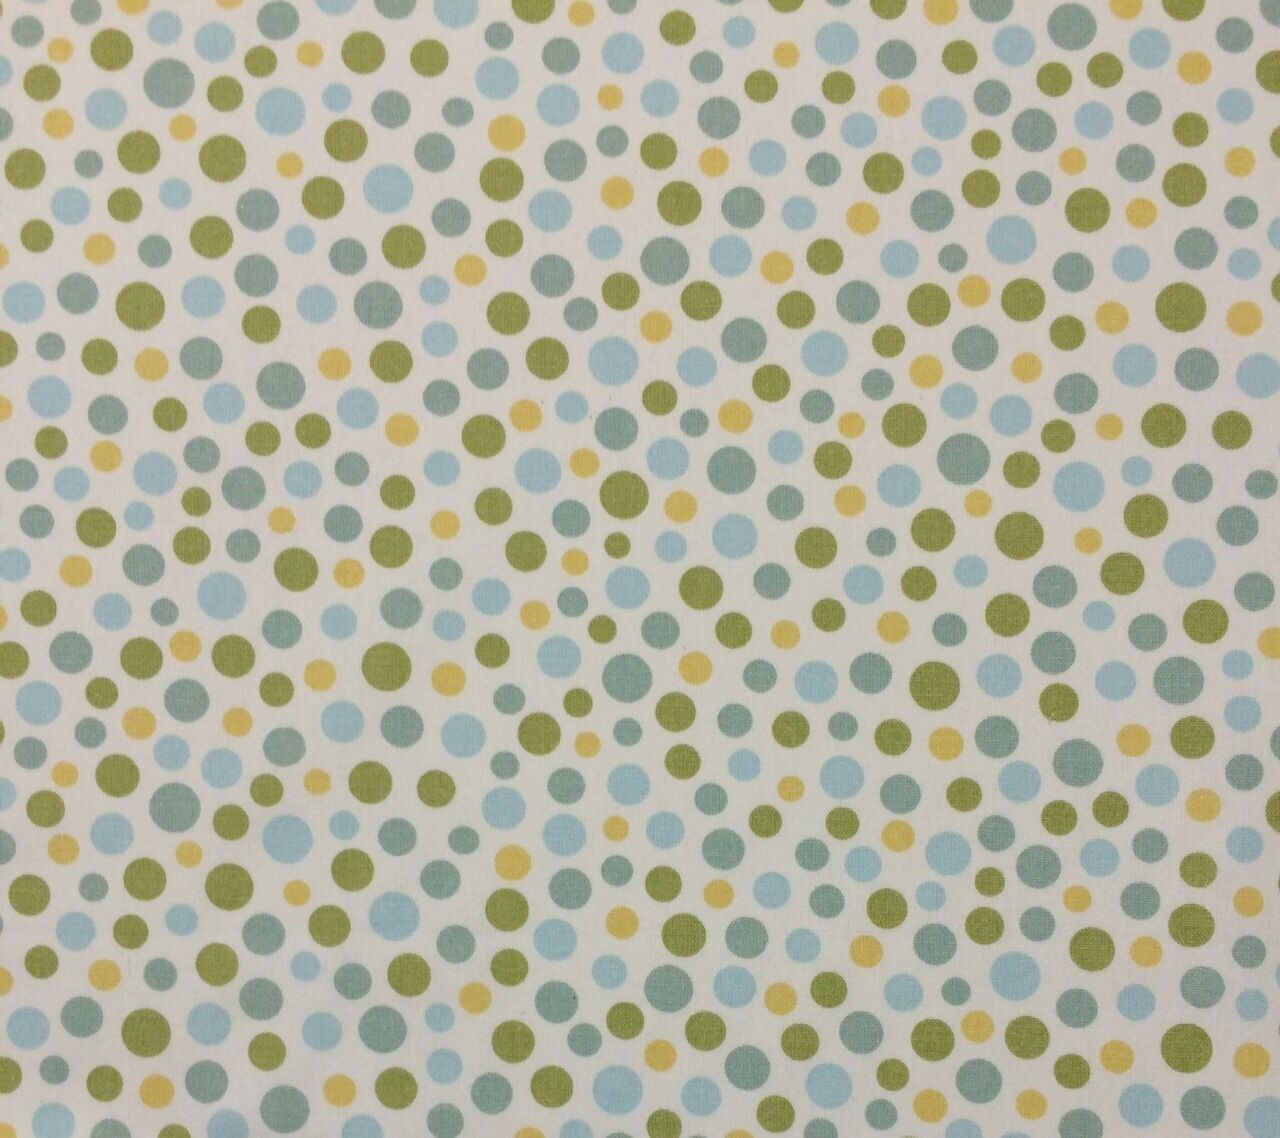 Primary image for P KAUFMANN DOTTY DOT ROBINS EGG BLUE GREEN GEOMETRIC FABRIC BY THE YARD 54"W